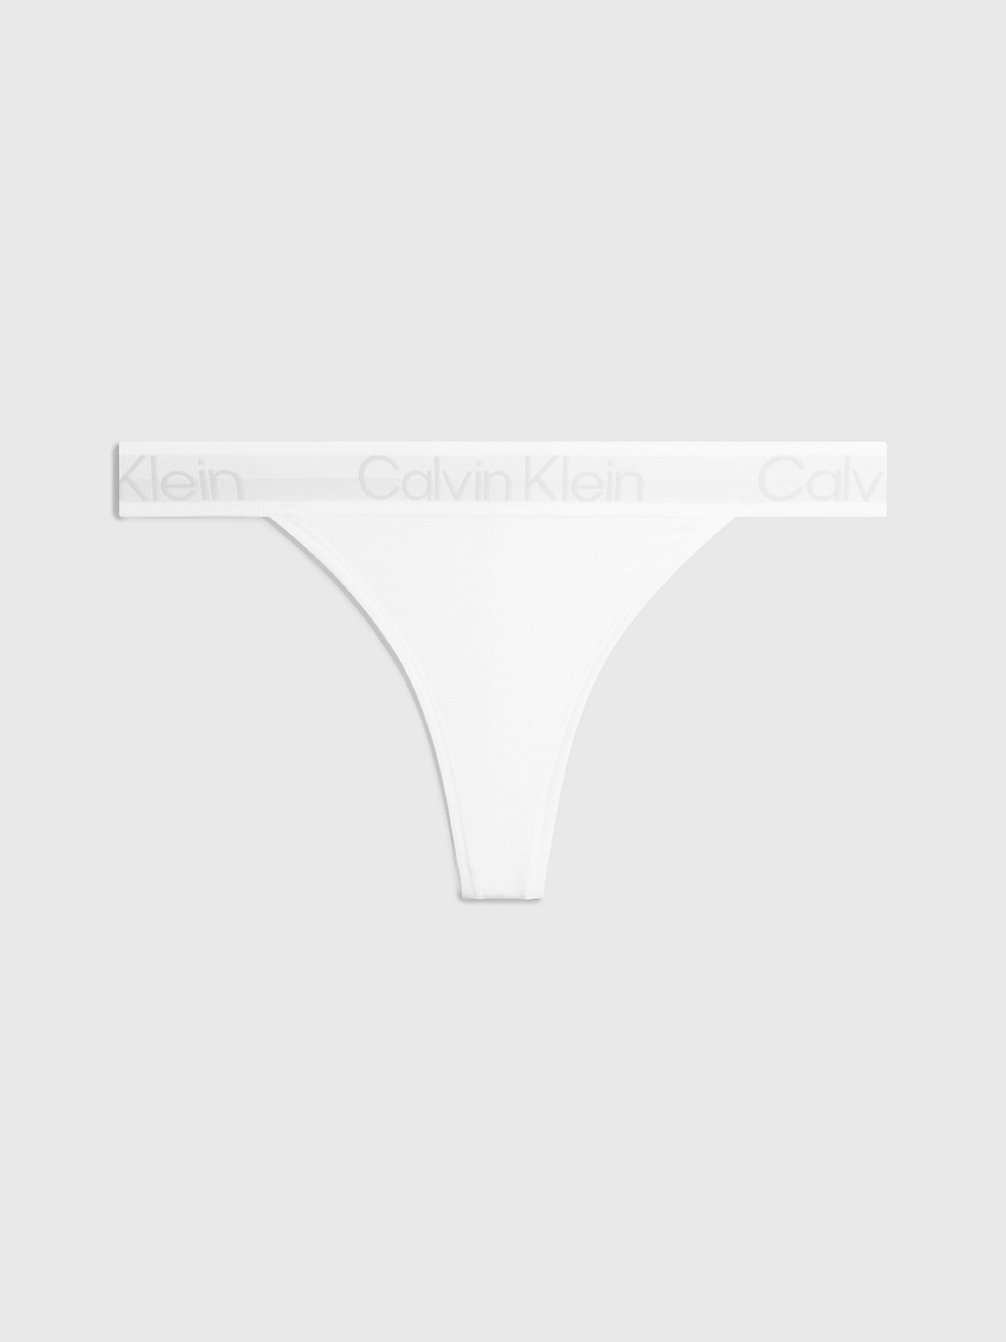 Tanga - Modern Structure > WHITE > undefined mujer > Calvin Klein